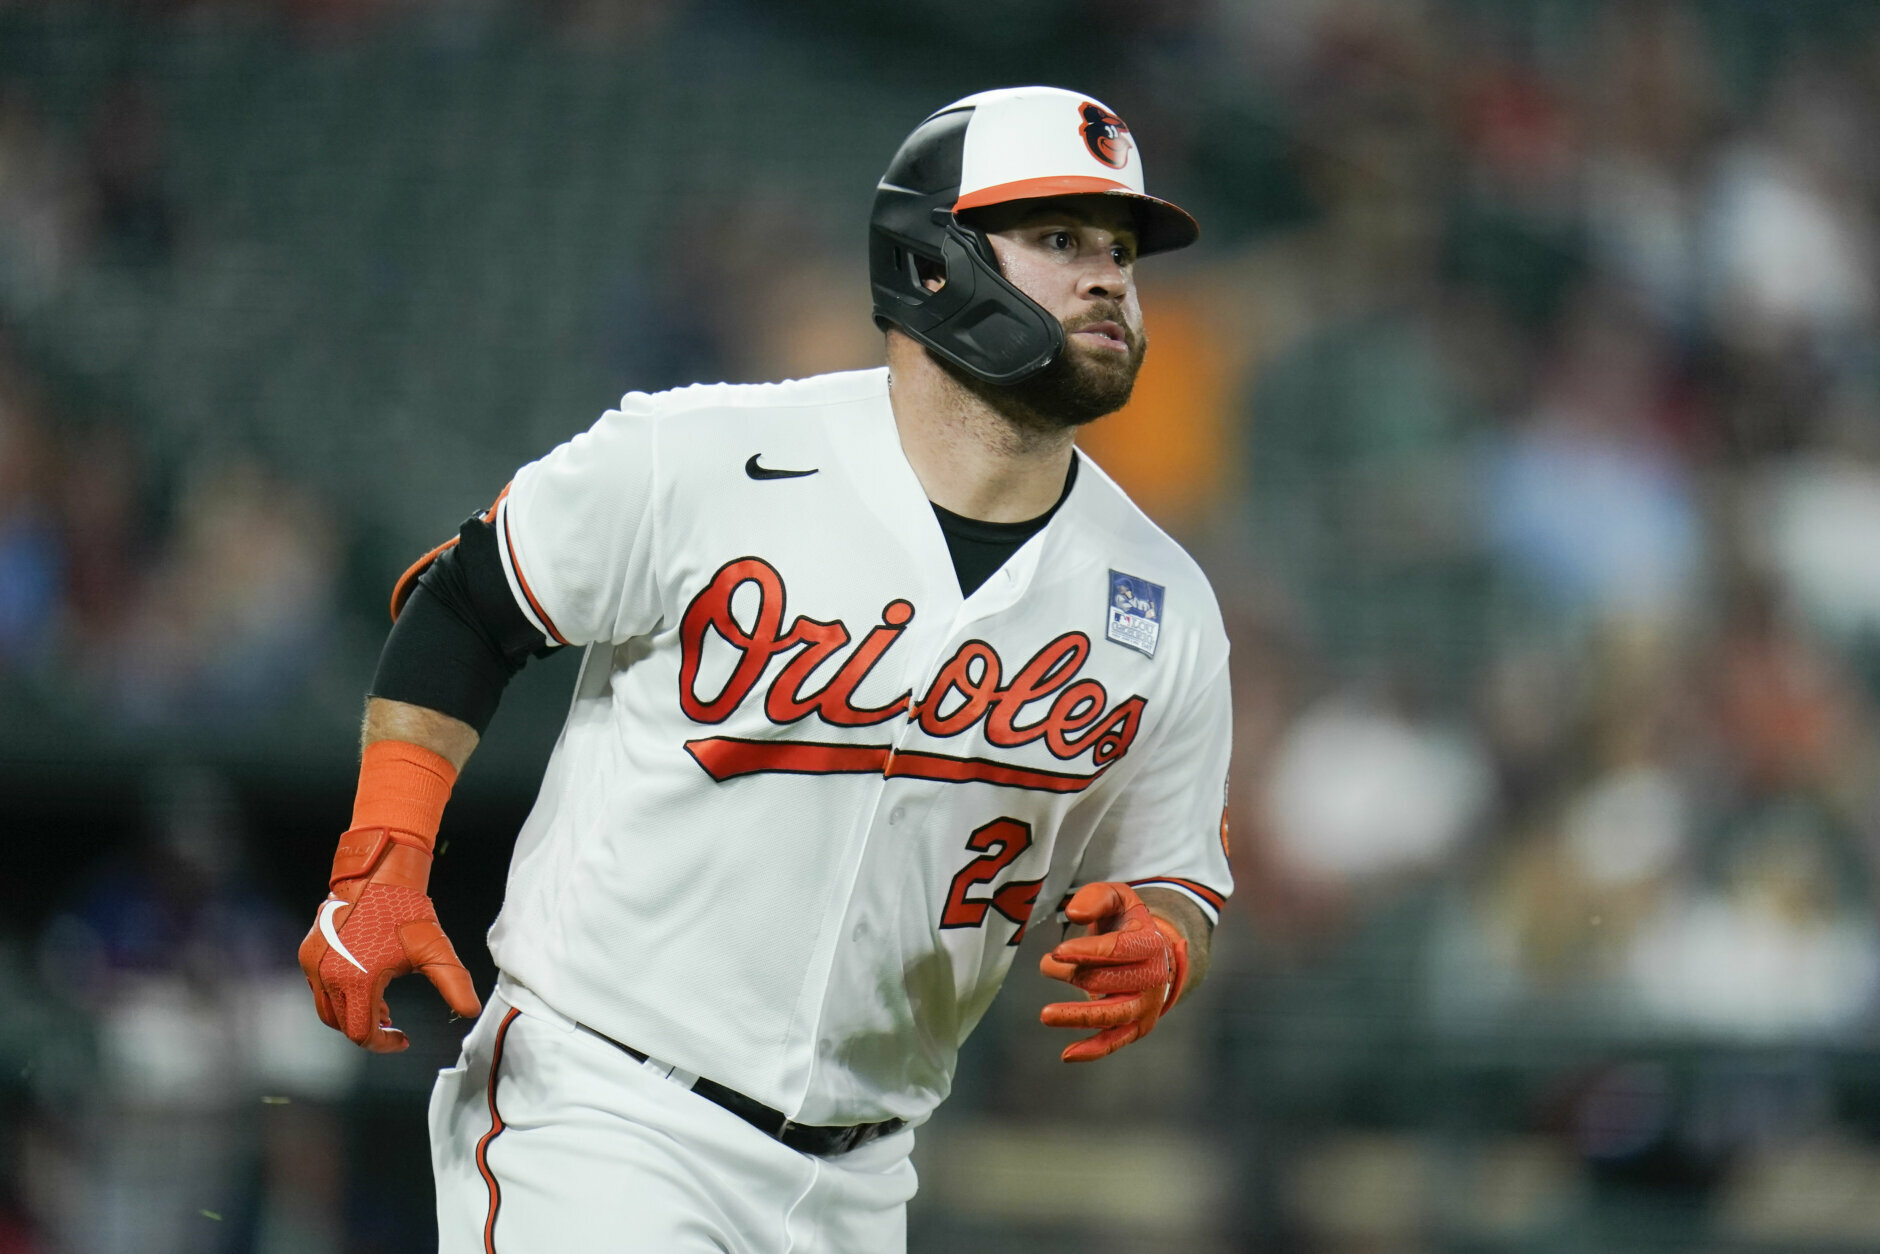 Baltimore Orioles' DJ Stewart watches his ball as he hits a two-run home run against Minnesota Twins starting pitcher Randy Dobnak during the fifth inning of a baseball game, Wednesday, June 2, 2021, in Baltimore. Orioles' Freddy Galvis scored on the home run. (AP Photo/Julio Cortez)